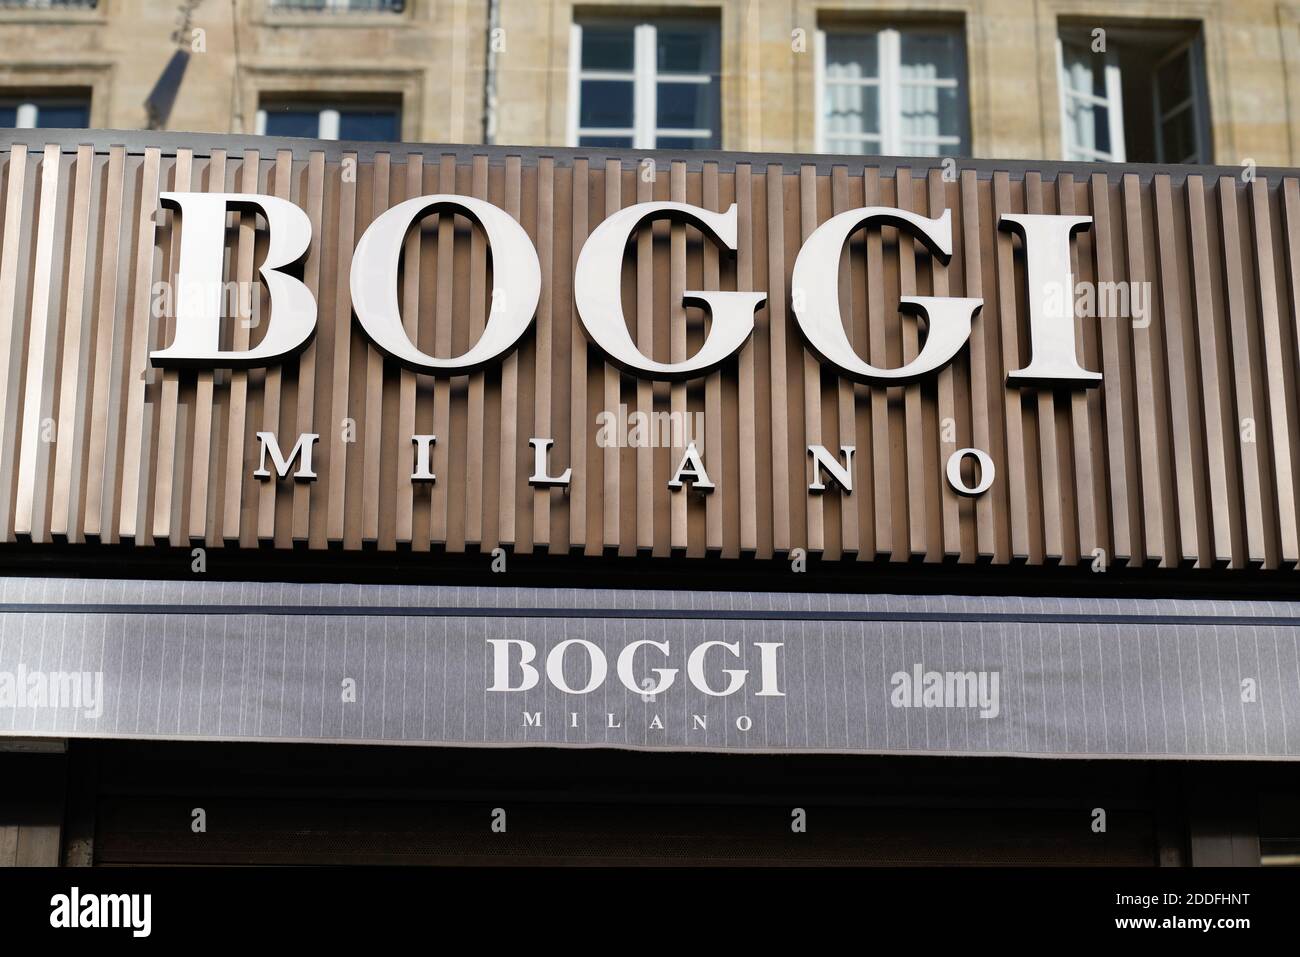 Bordeaux , Aquitaine / France - 11 08 2020 : boggi milano logo and text  sign shop of italian fashion store brand for men suits Stock Photo - Alamy